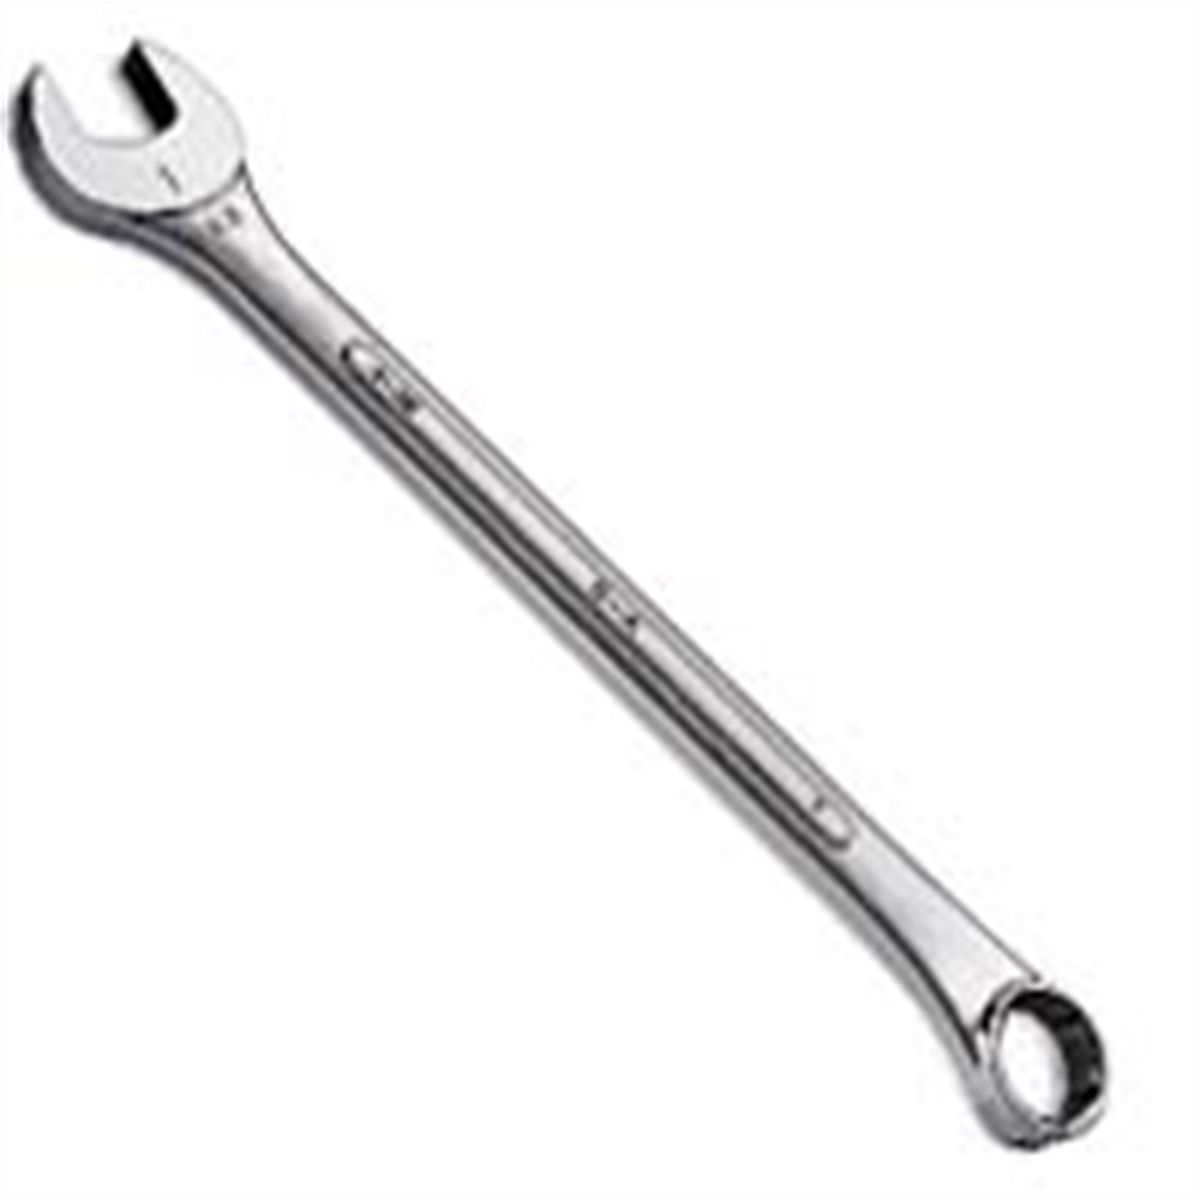 12-Pt Professional Fractional Combination Wrench - 1 11/16 In